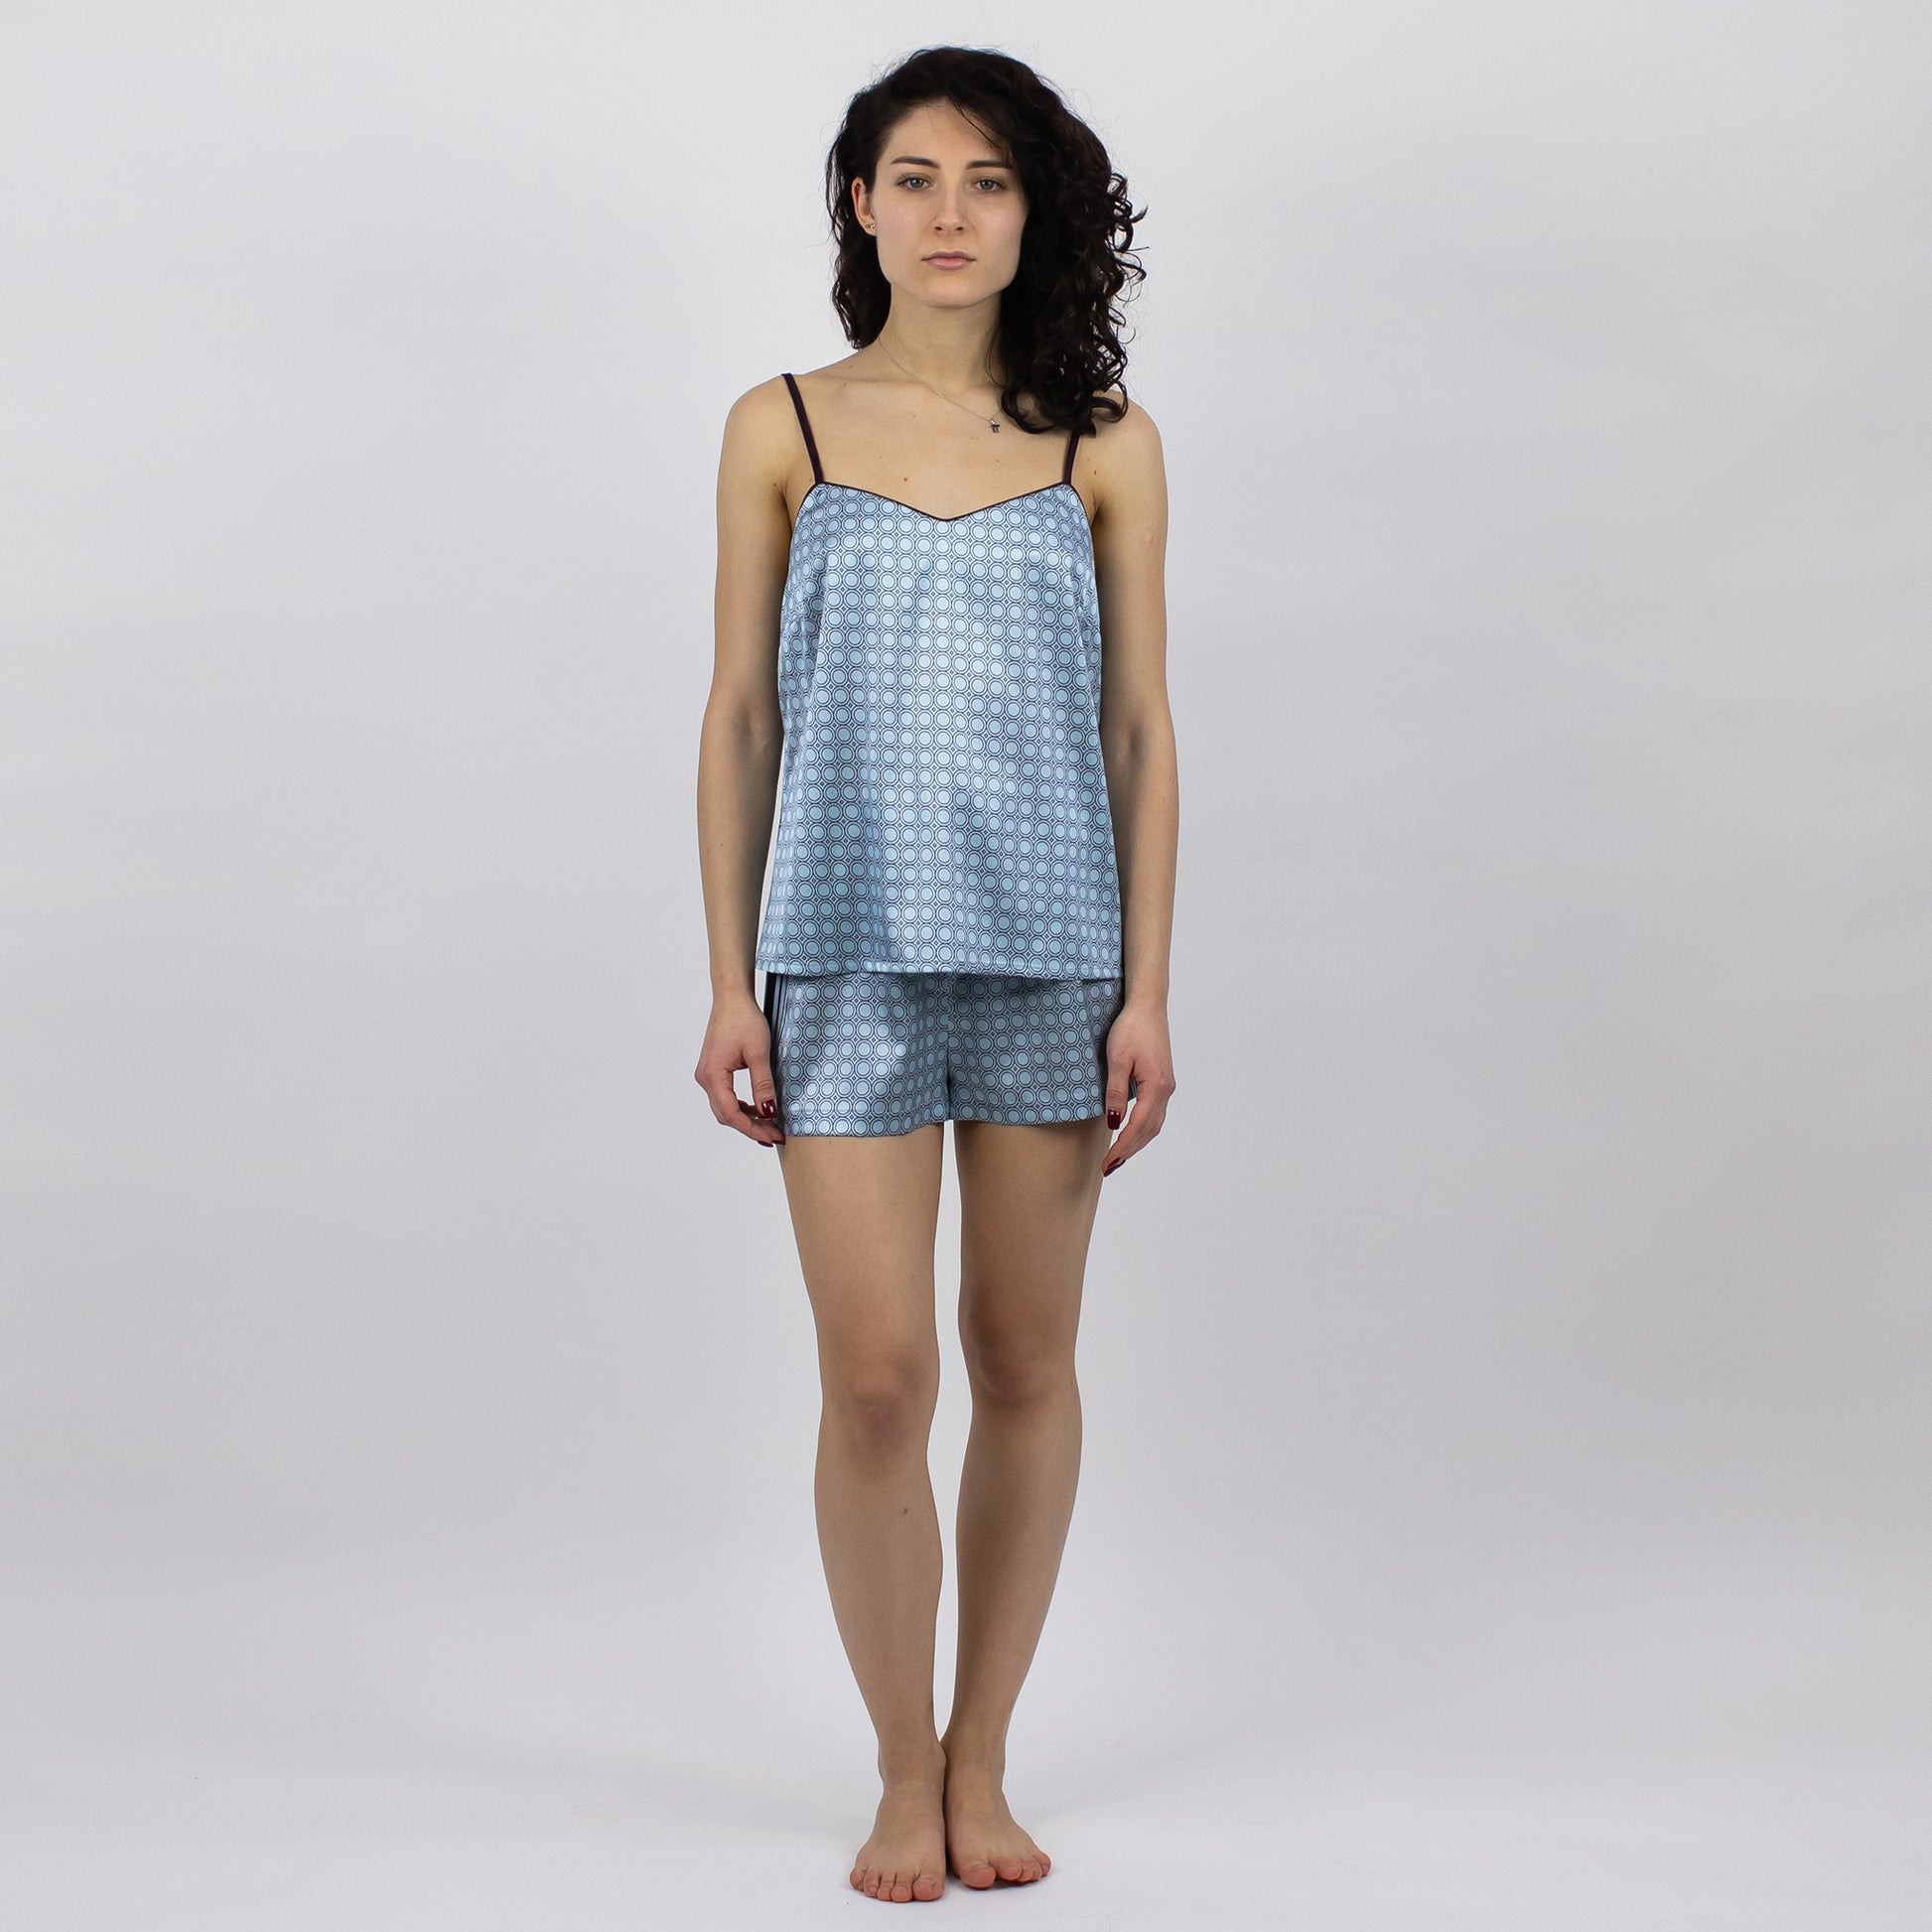 Pyjama bottoms and strappy top - Blue/White/Striped - Ladies